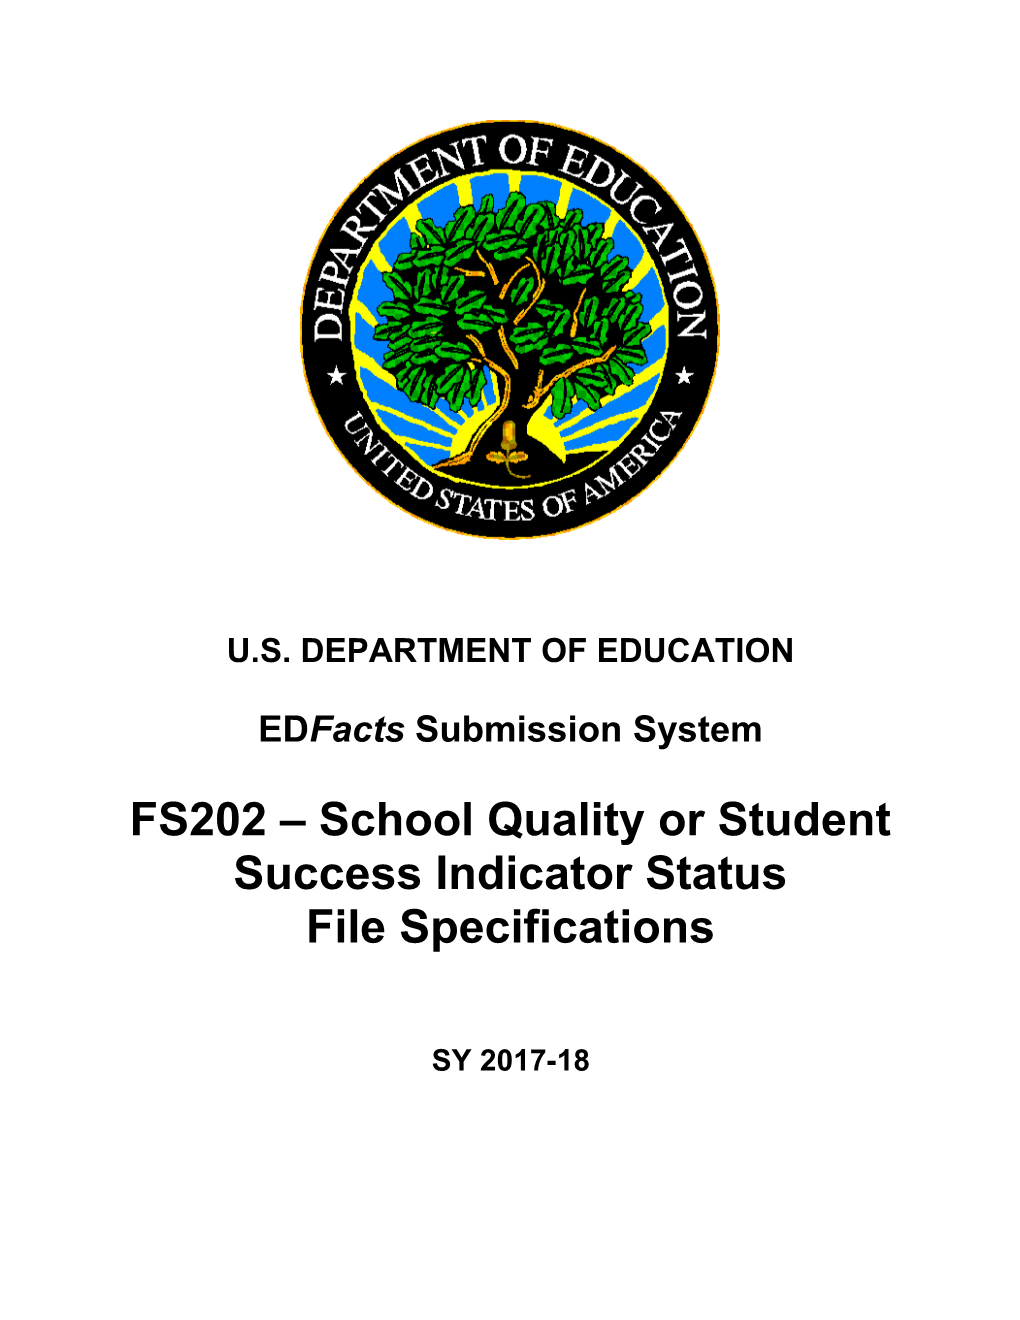 FS202 School Quality Or Student Success Indicator Status File Specifications (Msword)